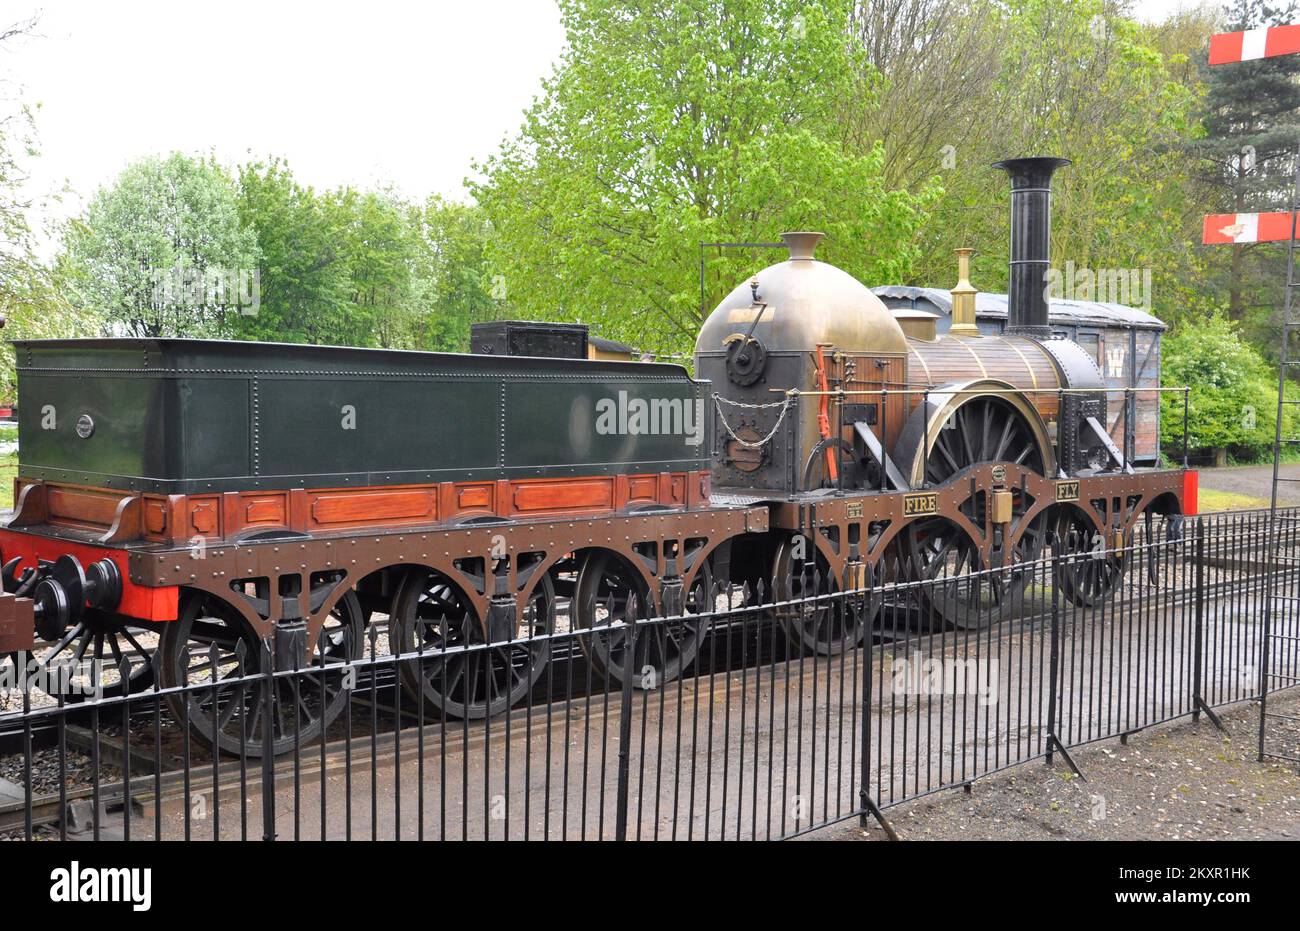 The Fire Fly, a  Broad Gauge Replica steam Locomotive, built in 2005 seen here at Didcot.The Fire Fly was designed by Daniel Gouch for service on the Stock Photo